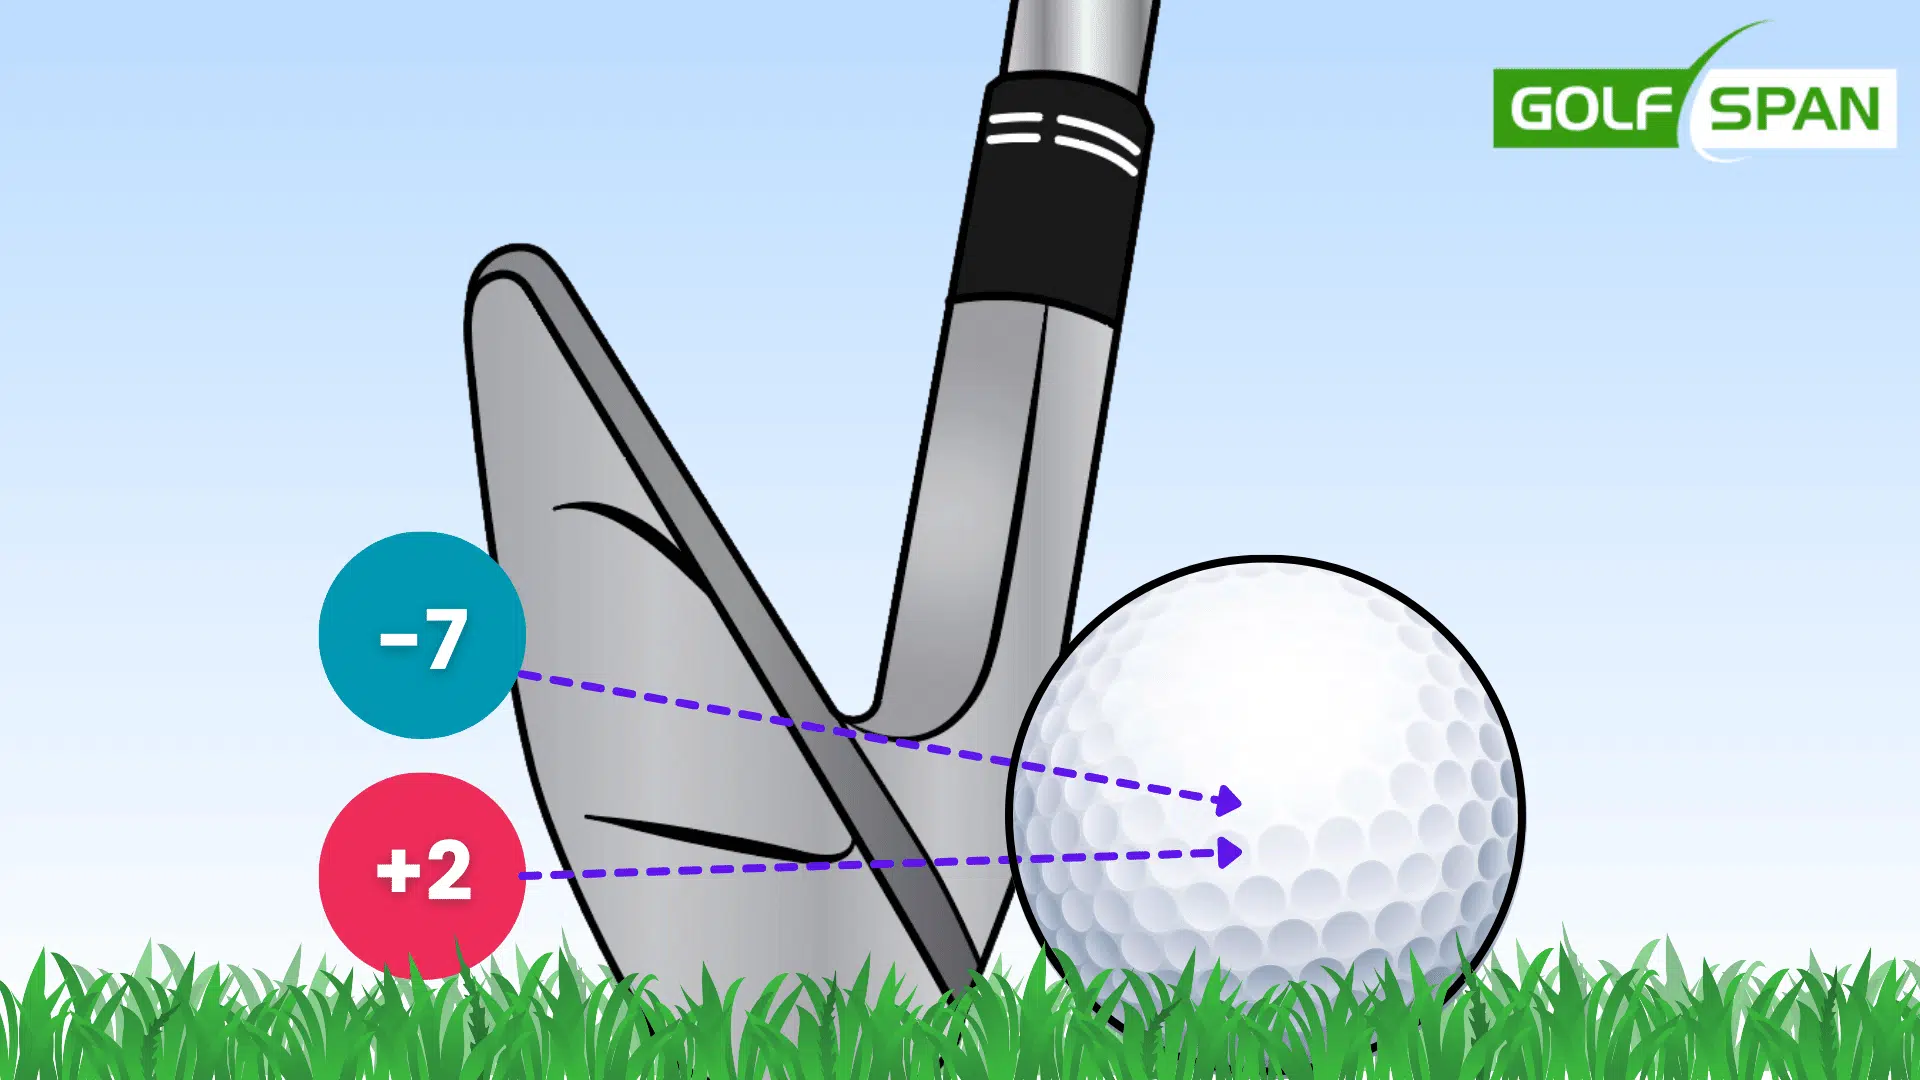 angle of attack golf 2